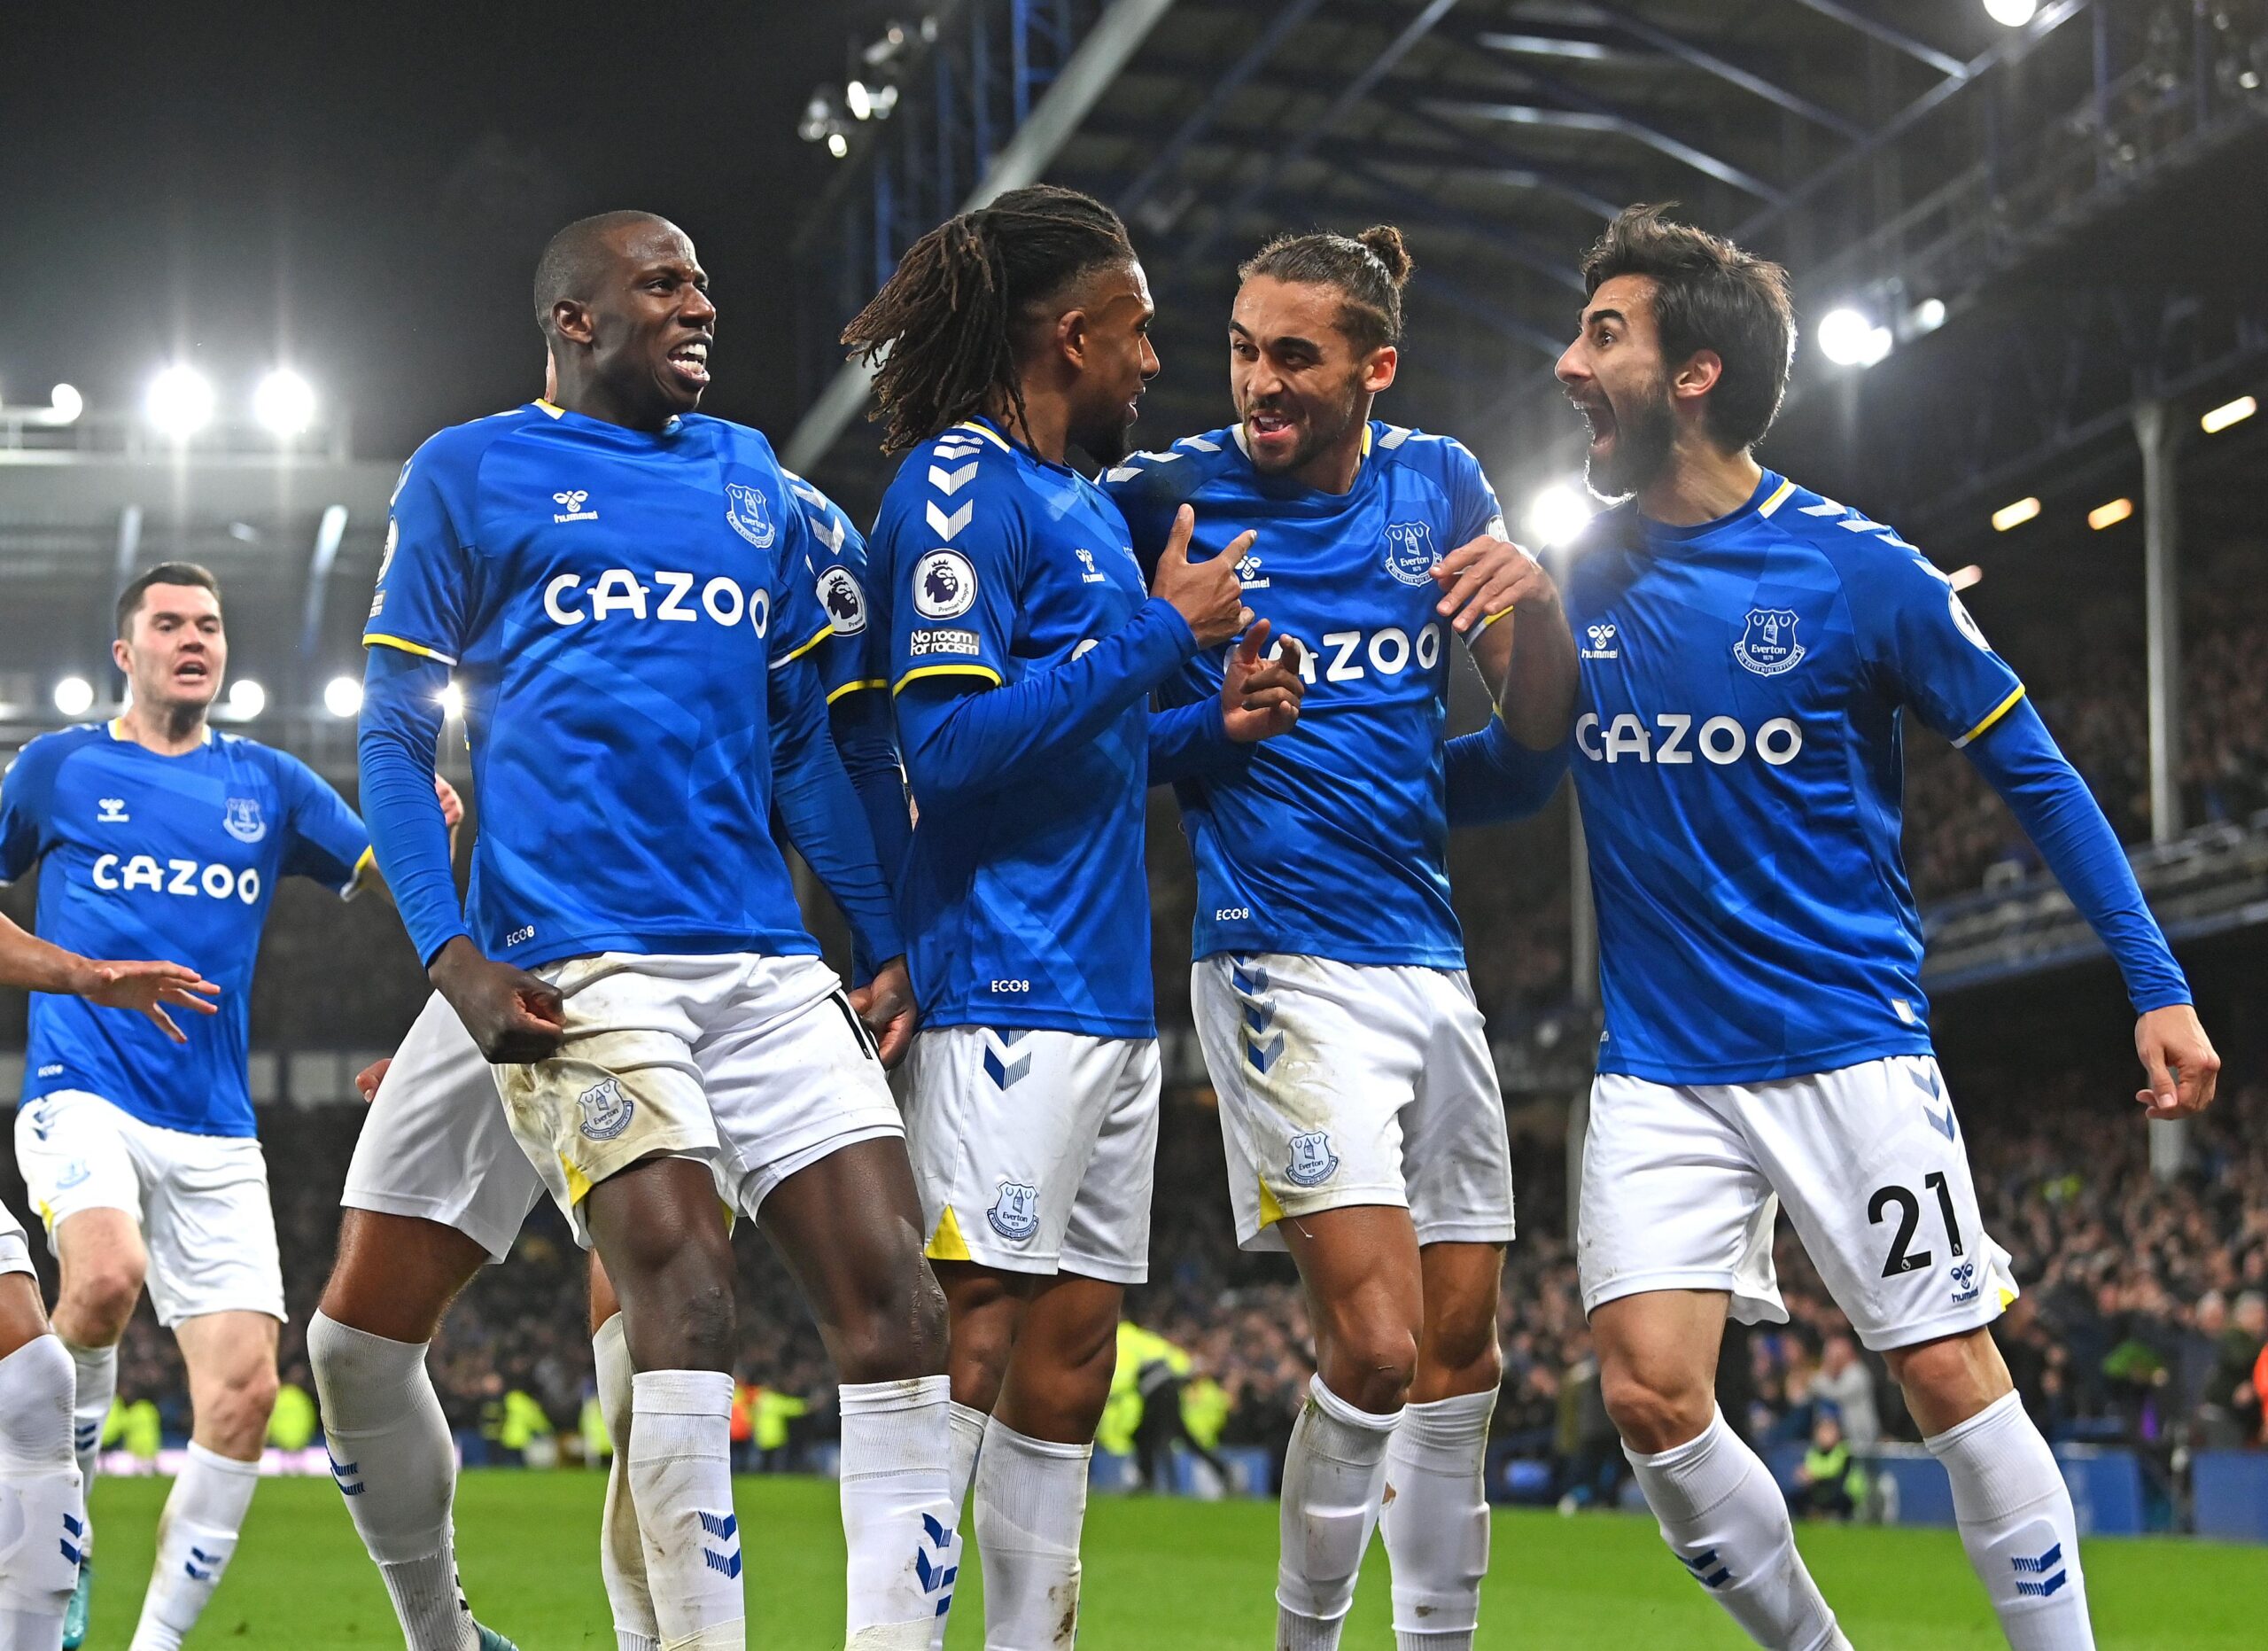 BBC report: Everton are set for their first home win of the season when they host Luton Town at Goodison Park…..